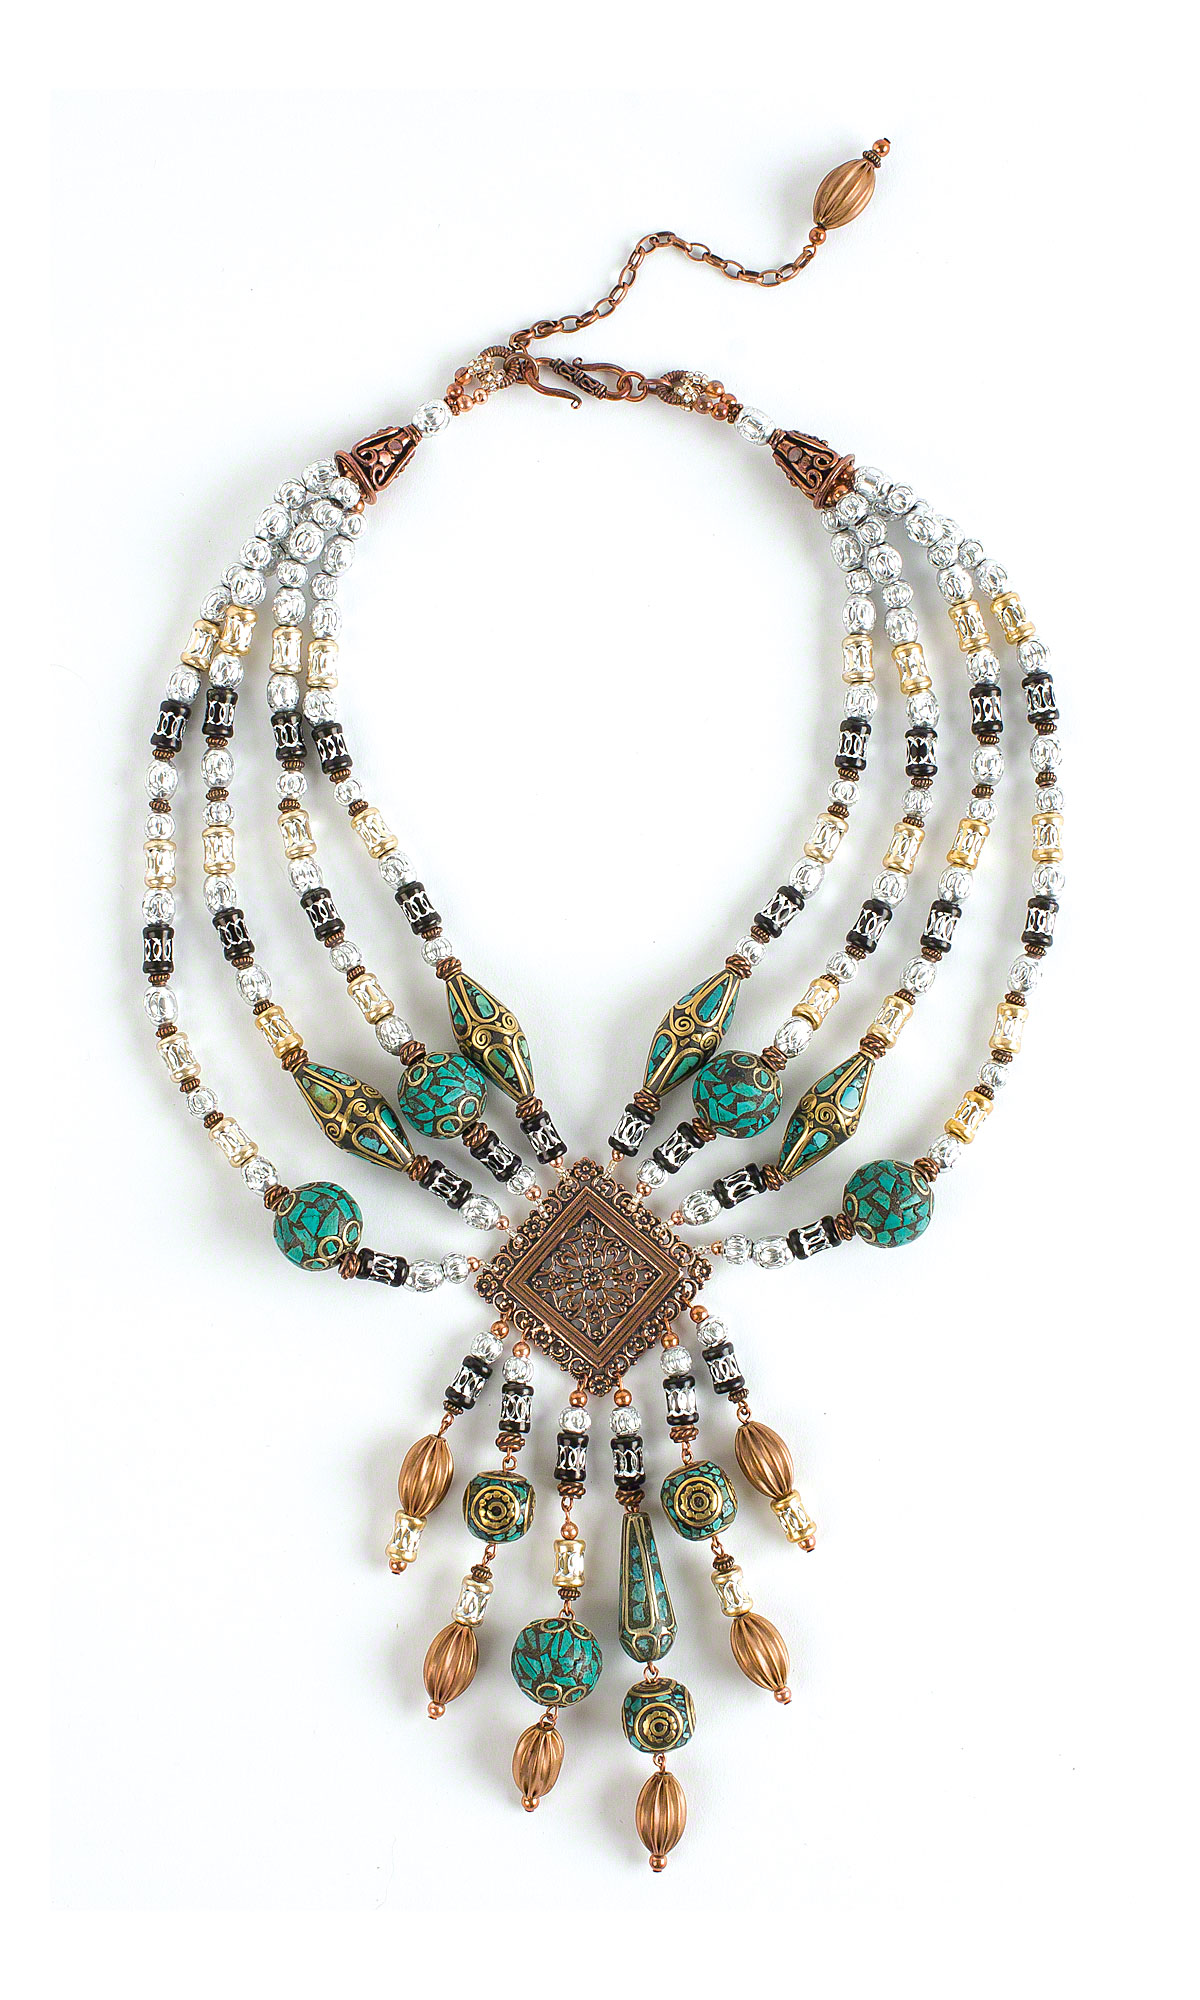 Jewelry Design - Multi-Strand Necklace with Aluminum Beads, Copper ...